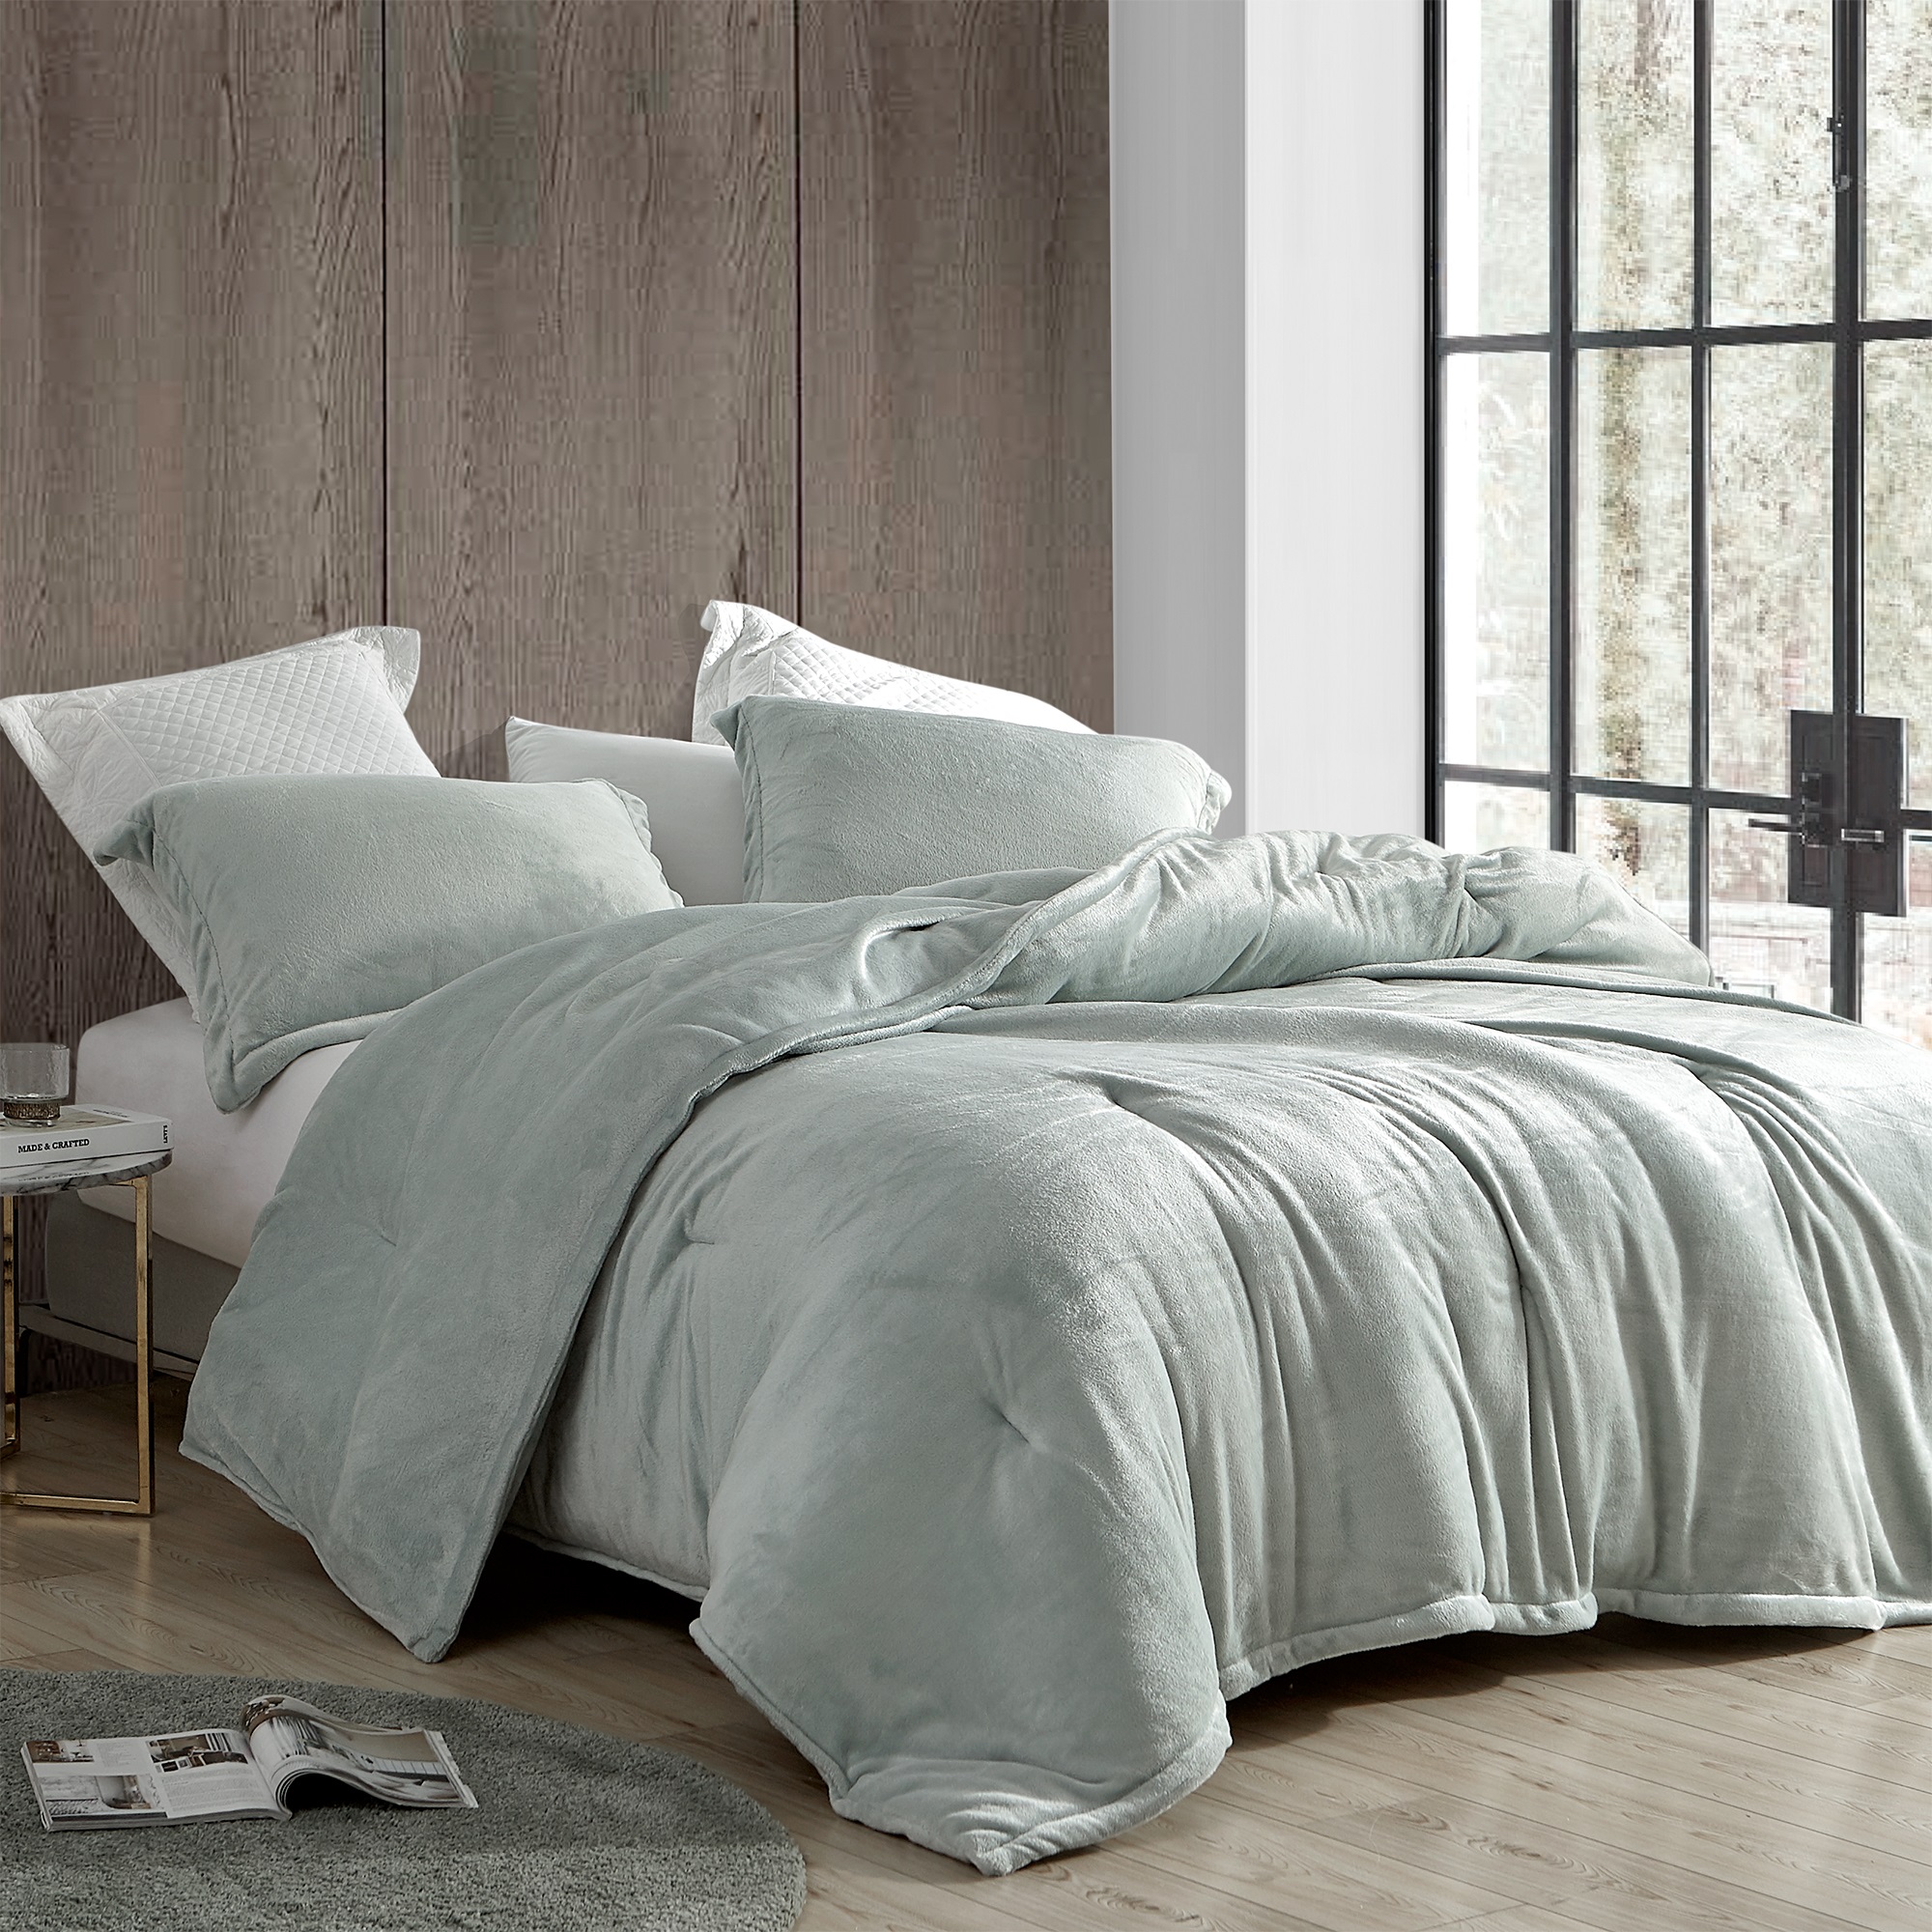 Coma Inducer® Oversized Comforter - Touchy Feely - Mineral Gray